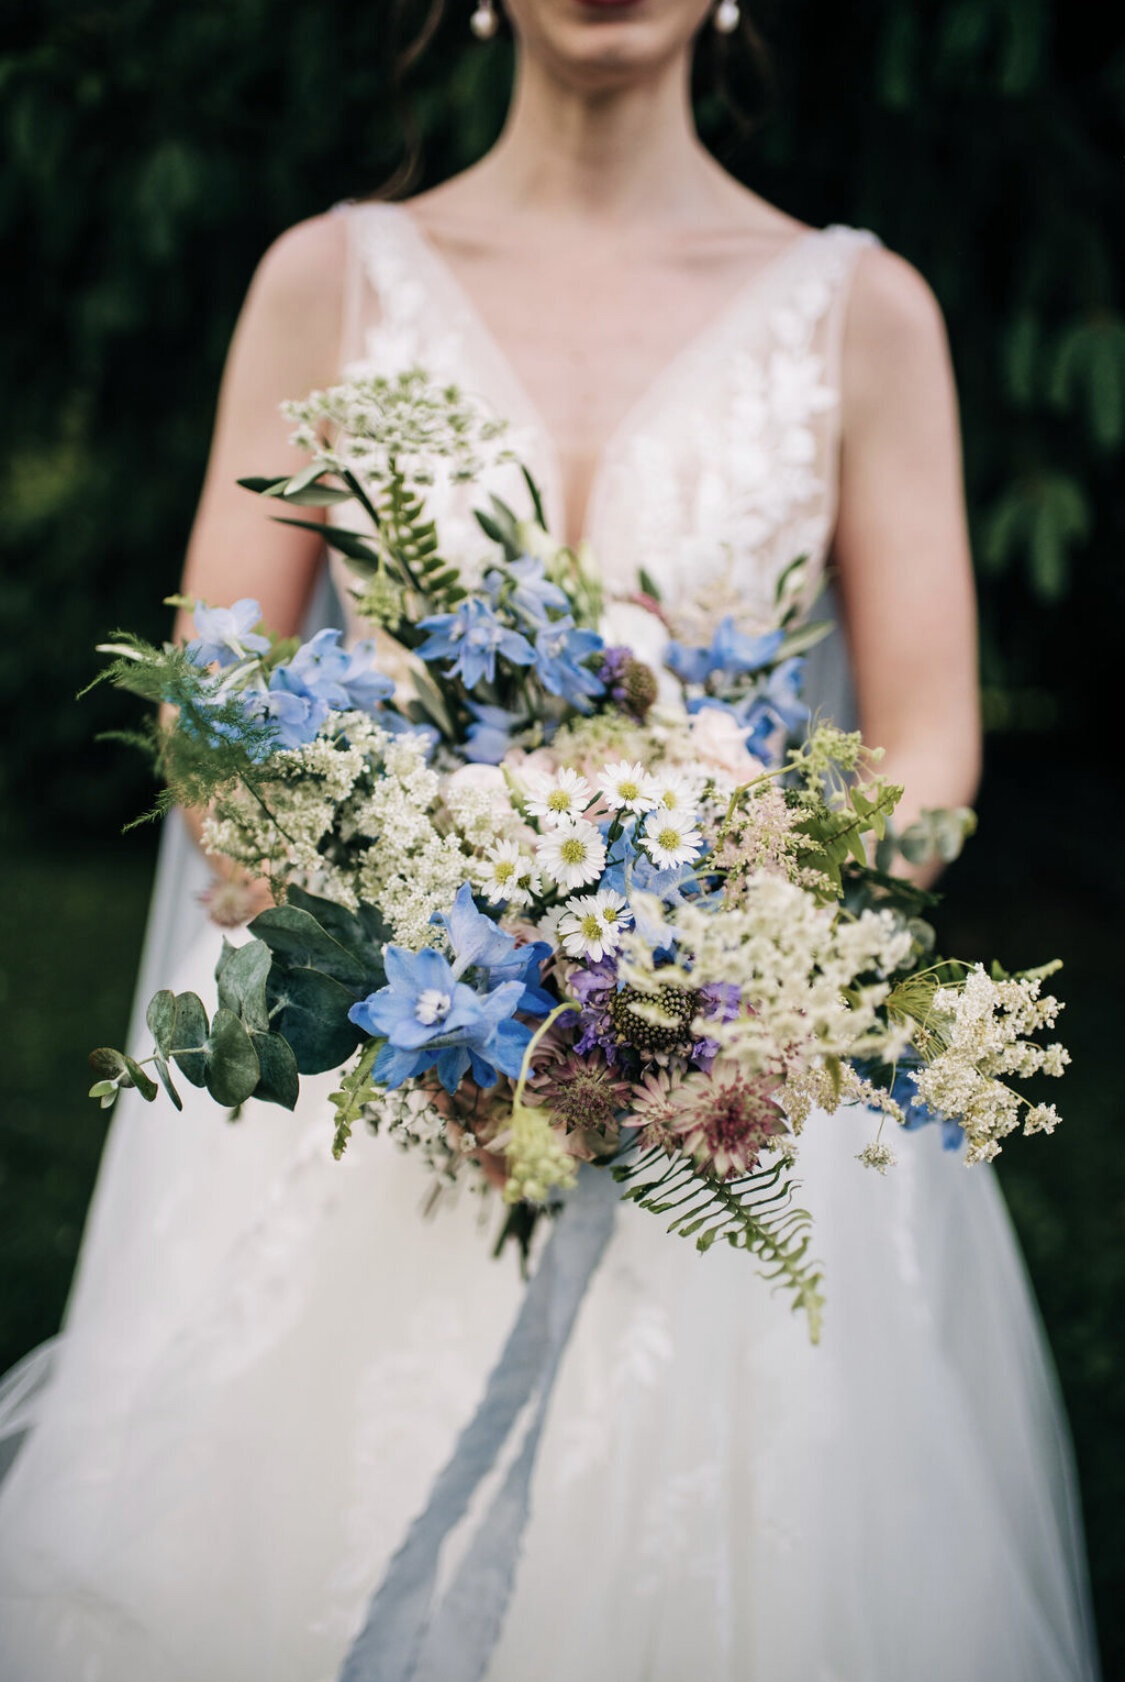 Textured blue and white bridal bouquet by Boston florist Prose Florals